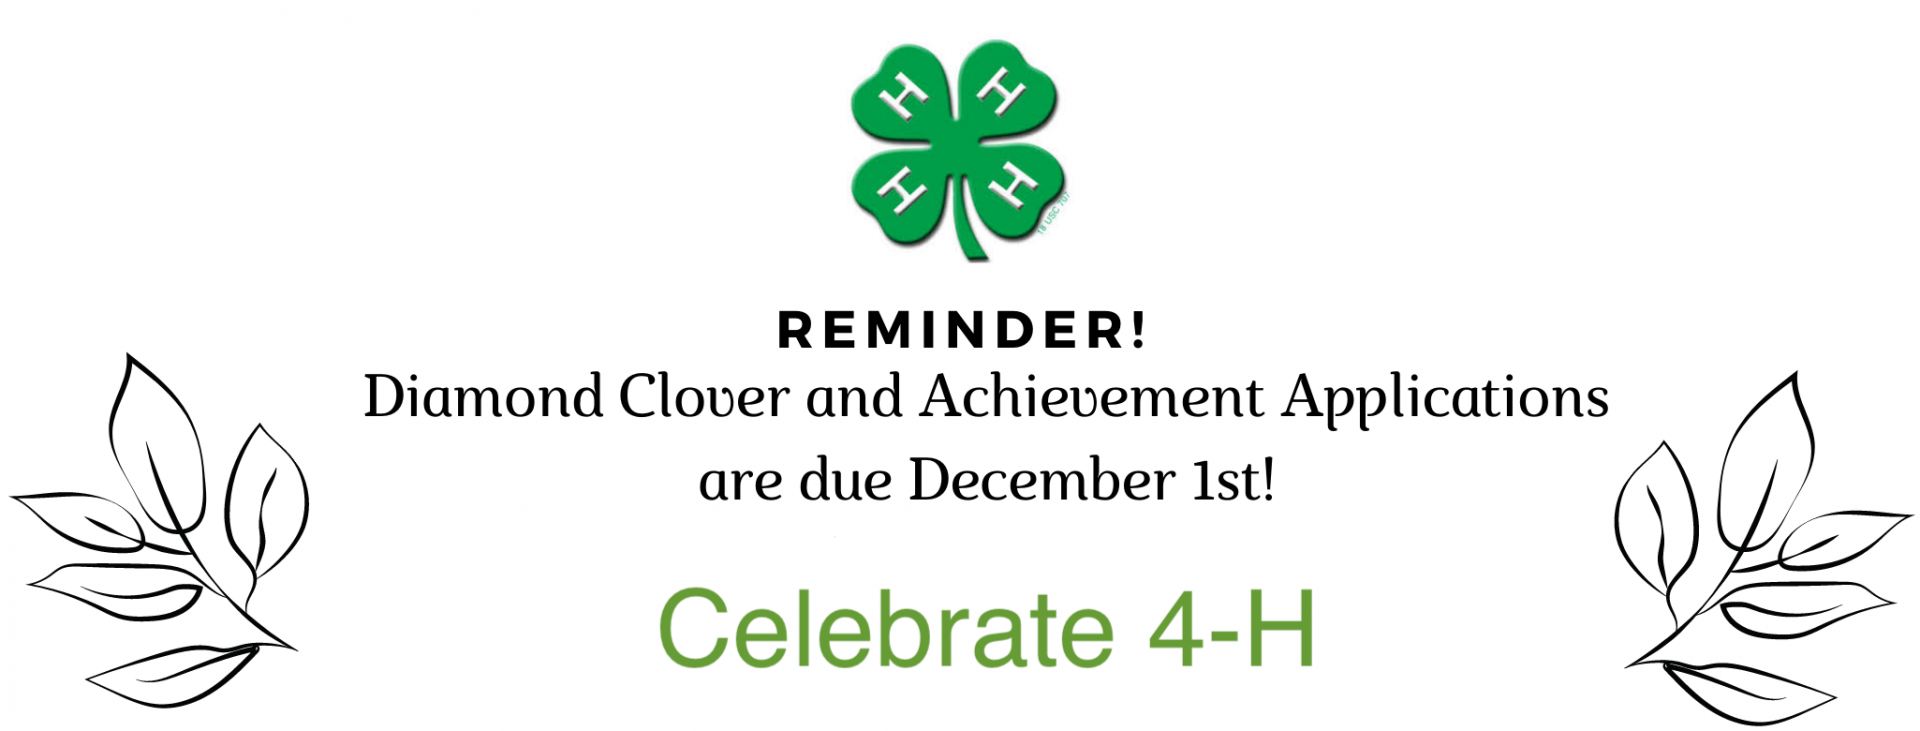 Diamond Clover and Achievement Applications are due December 1st